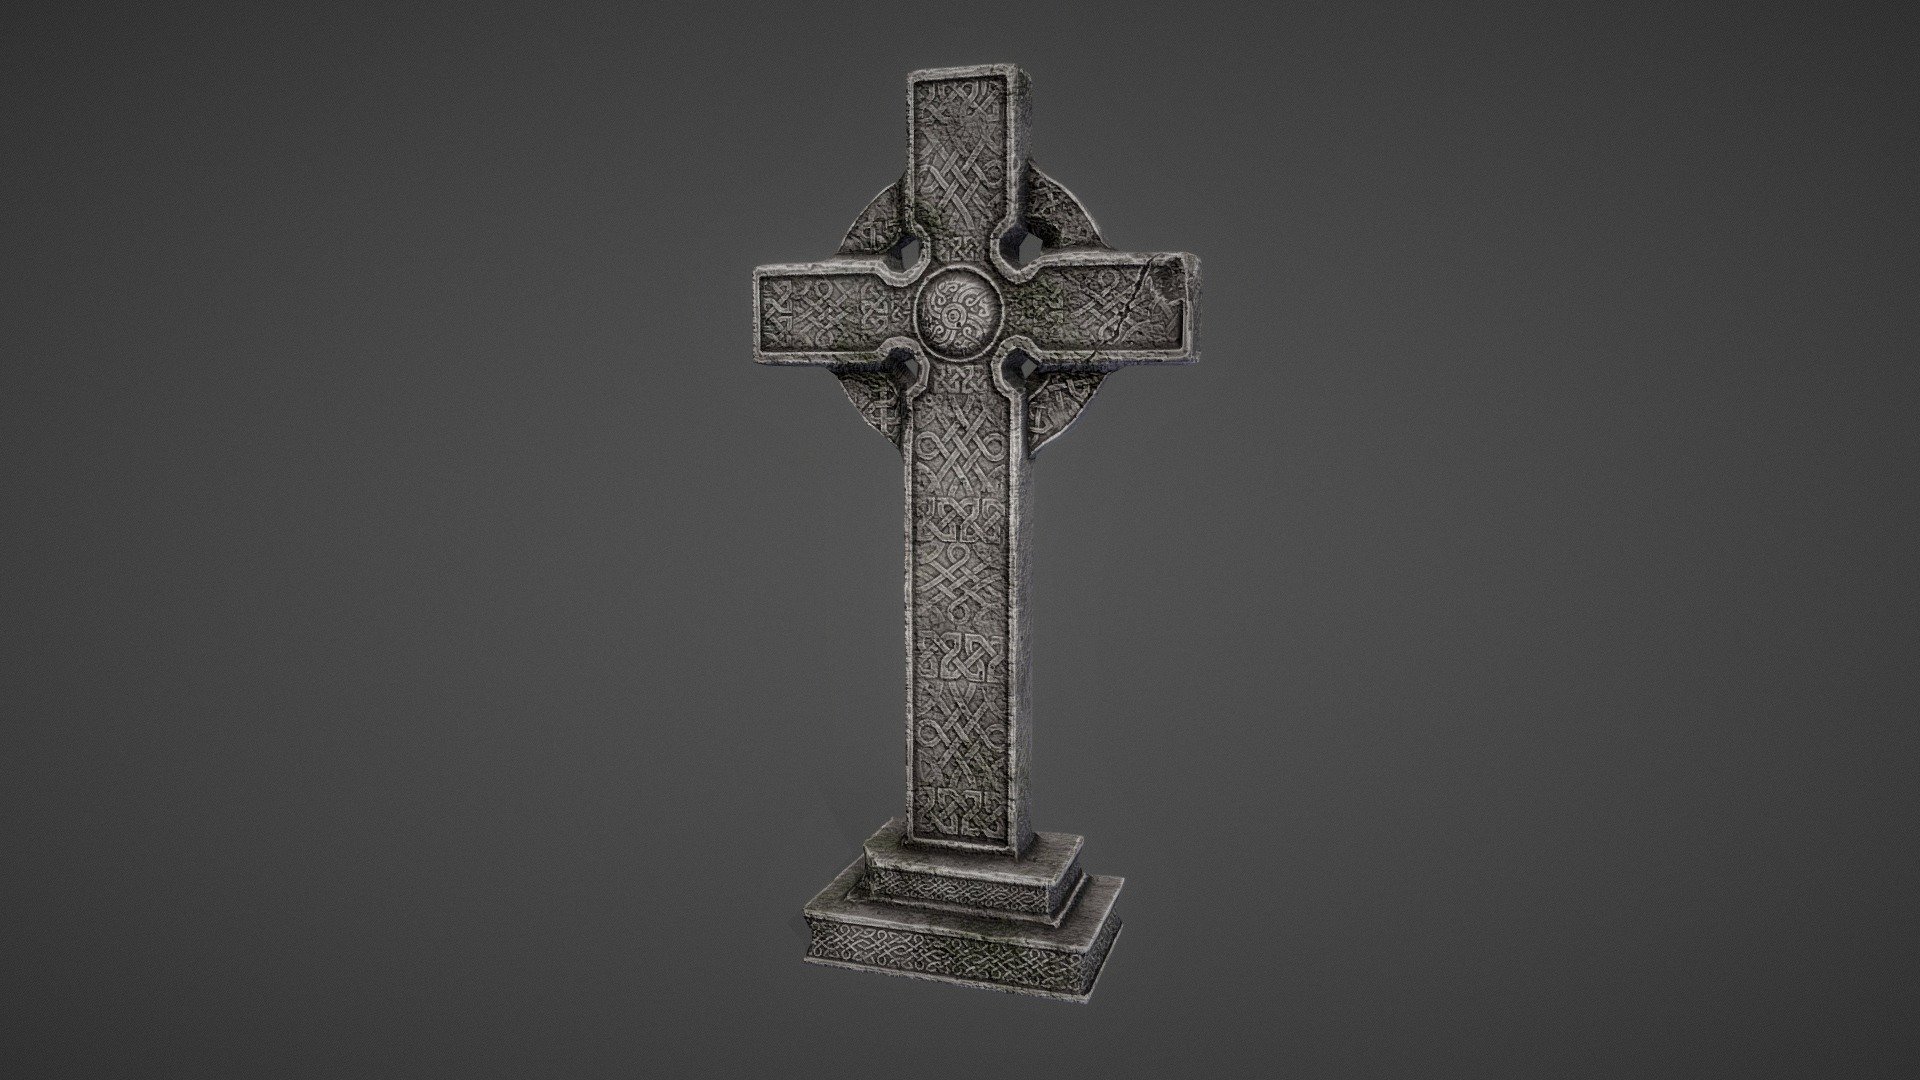 PBR gameready asset. Texture's resolution - 2048x2048 px. Zip-archieve includes fbx and unitypackage format 3d model